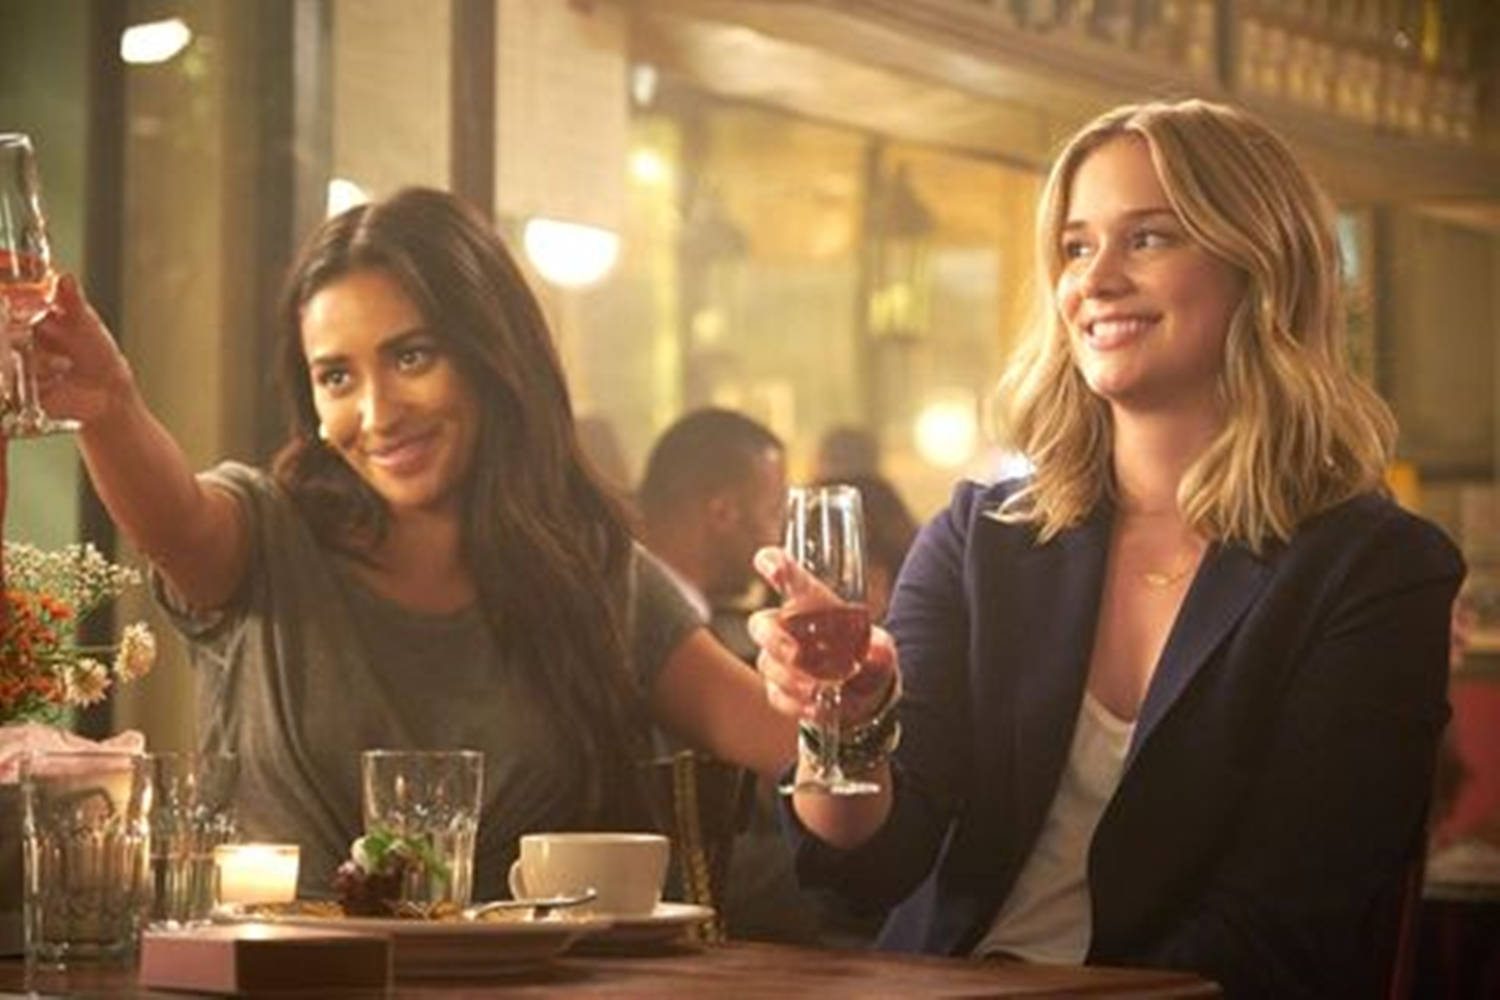 You Beck And Shay Bar Scene Wallpaper